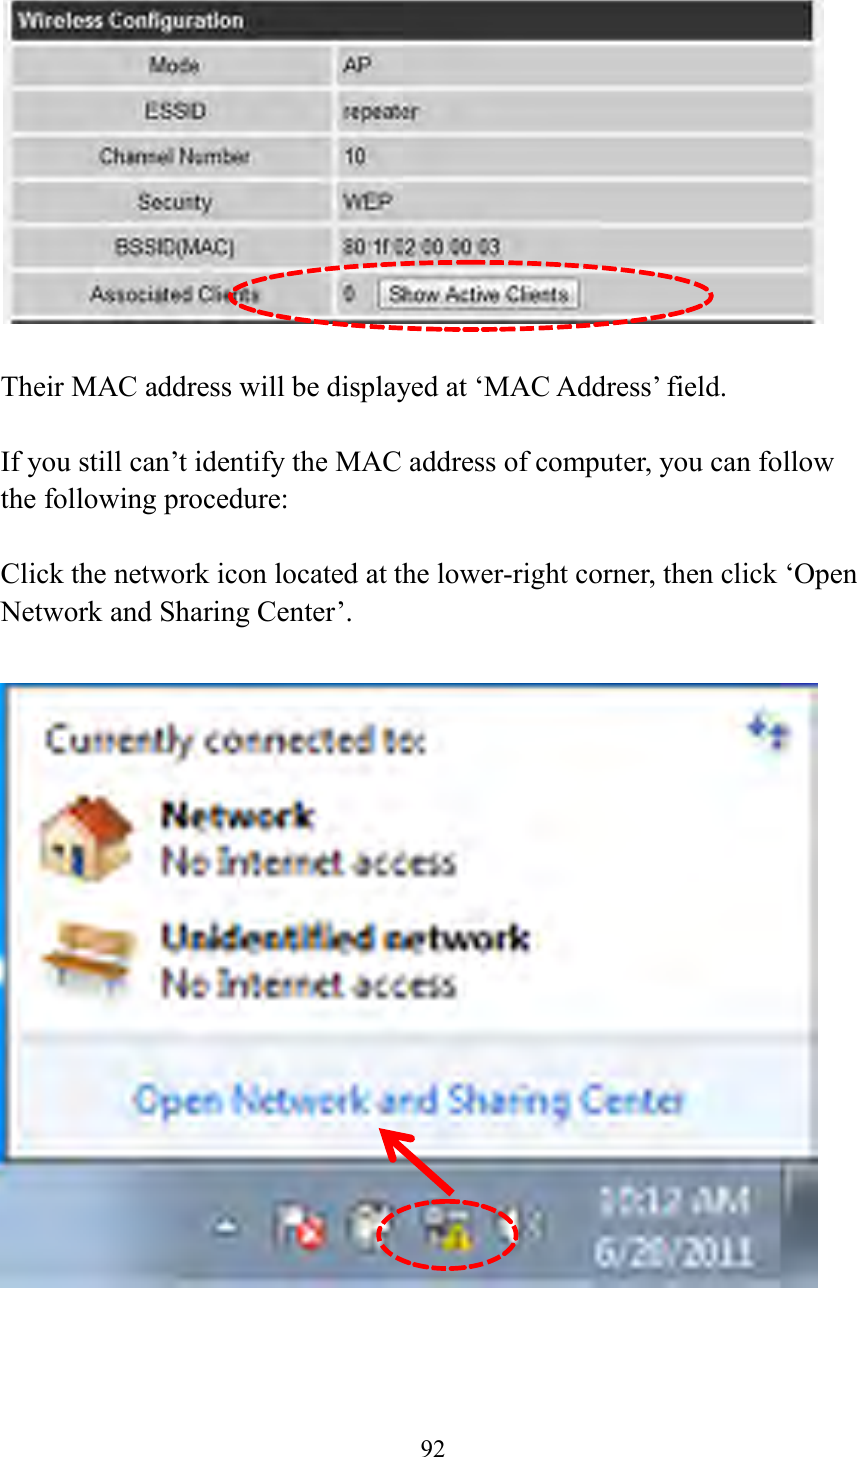  92    Their MAC address will be displayed at ‘MAC Address’ field.  If you still can’t identify the MAC address of computer, you can follow the following procedure:  Click the network icon located at the lower-right corner, then click ‘Open Network and Sharing Center’.       